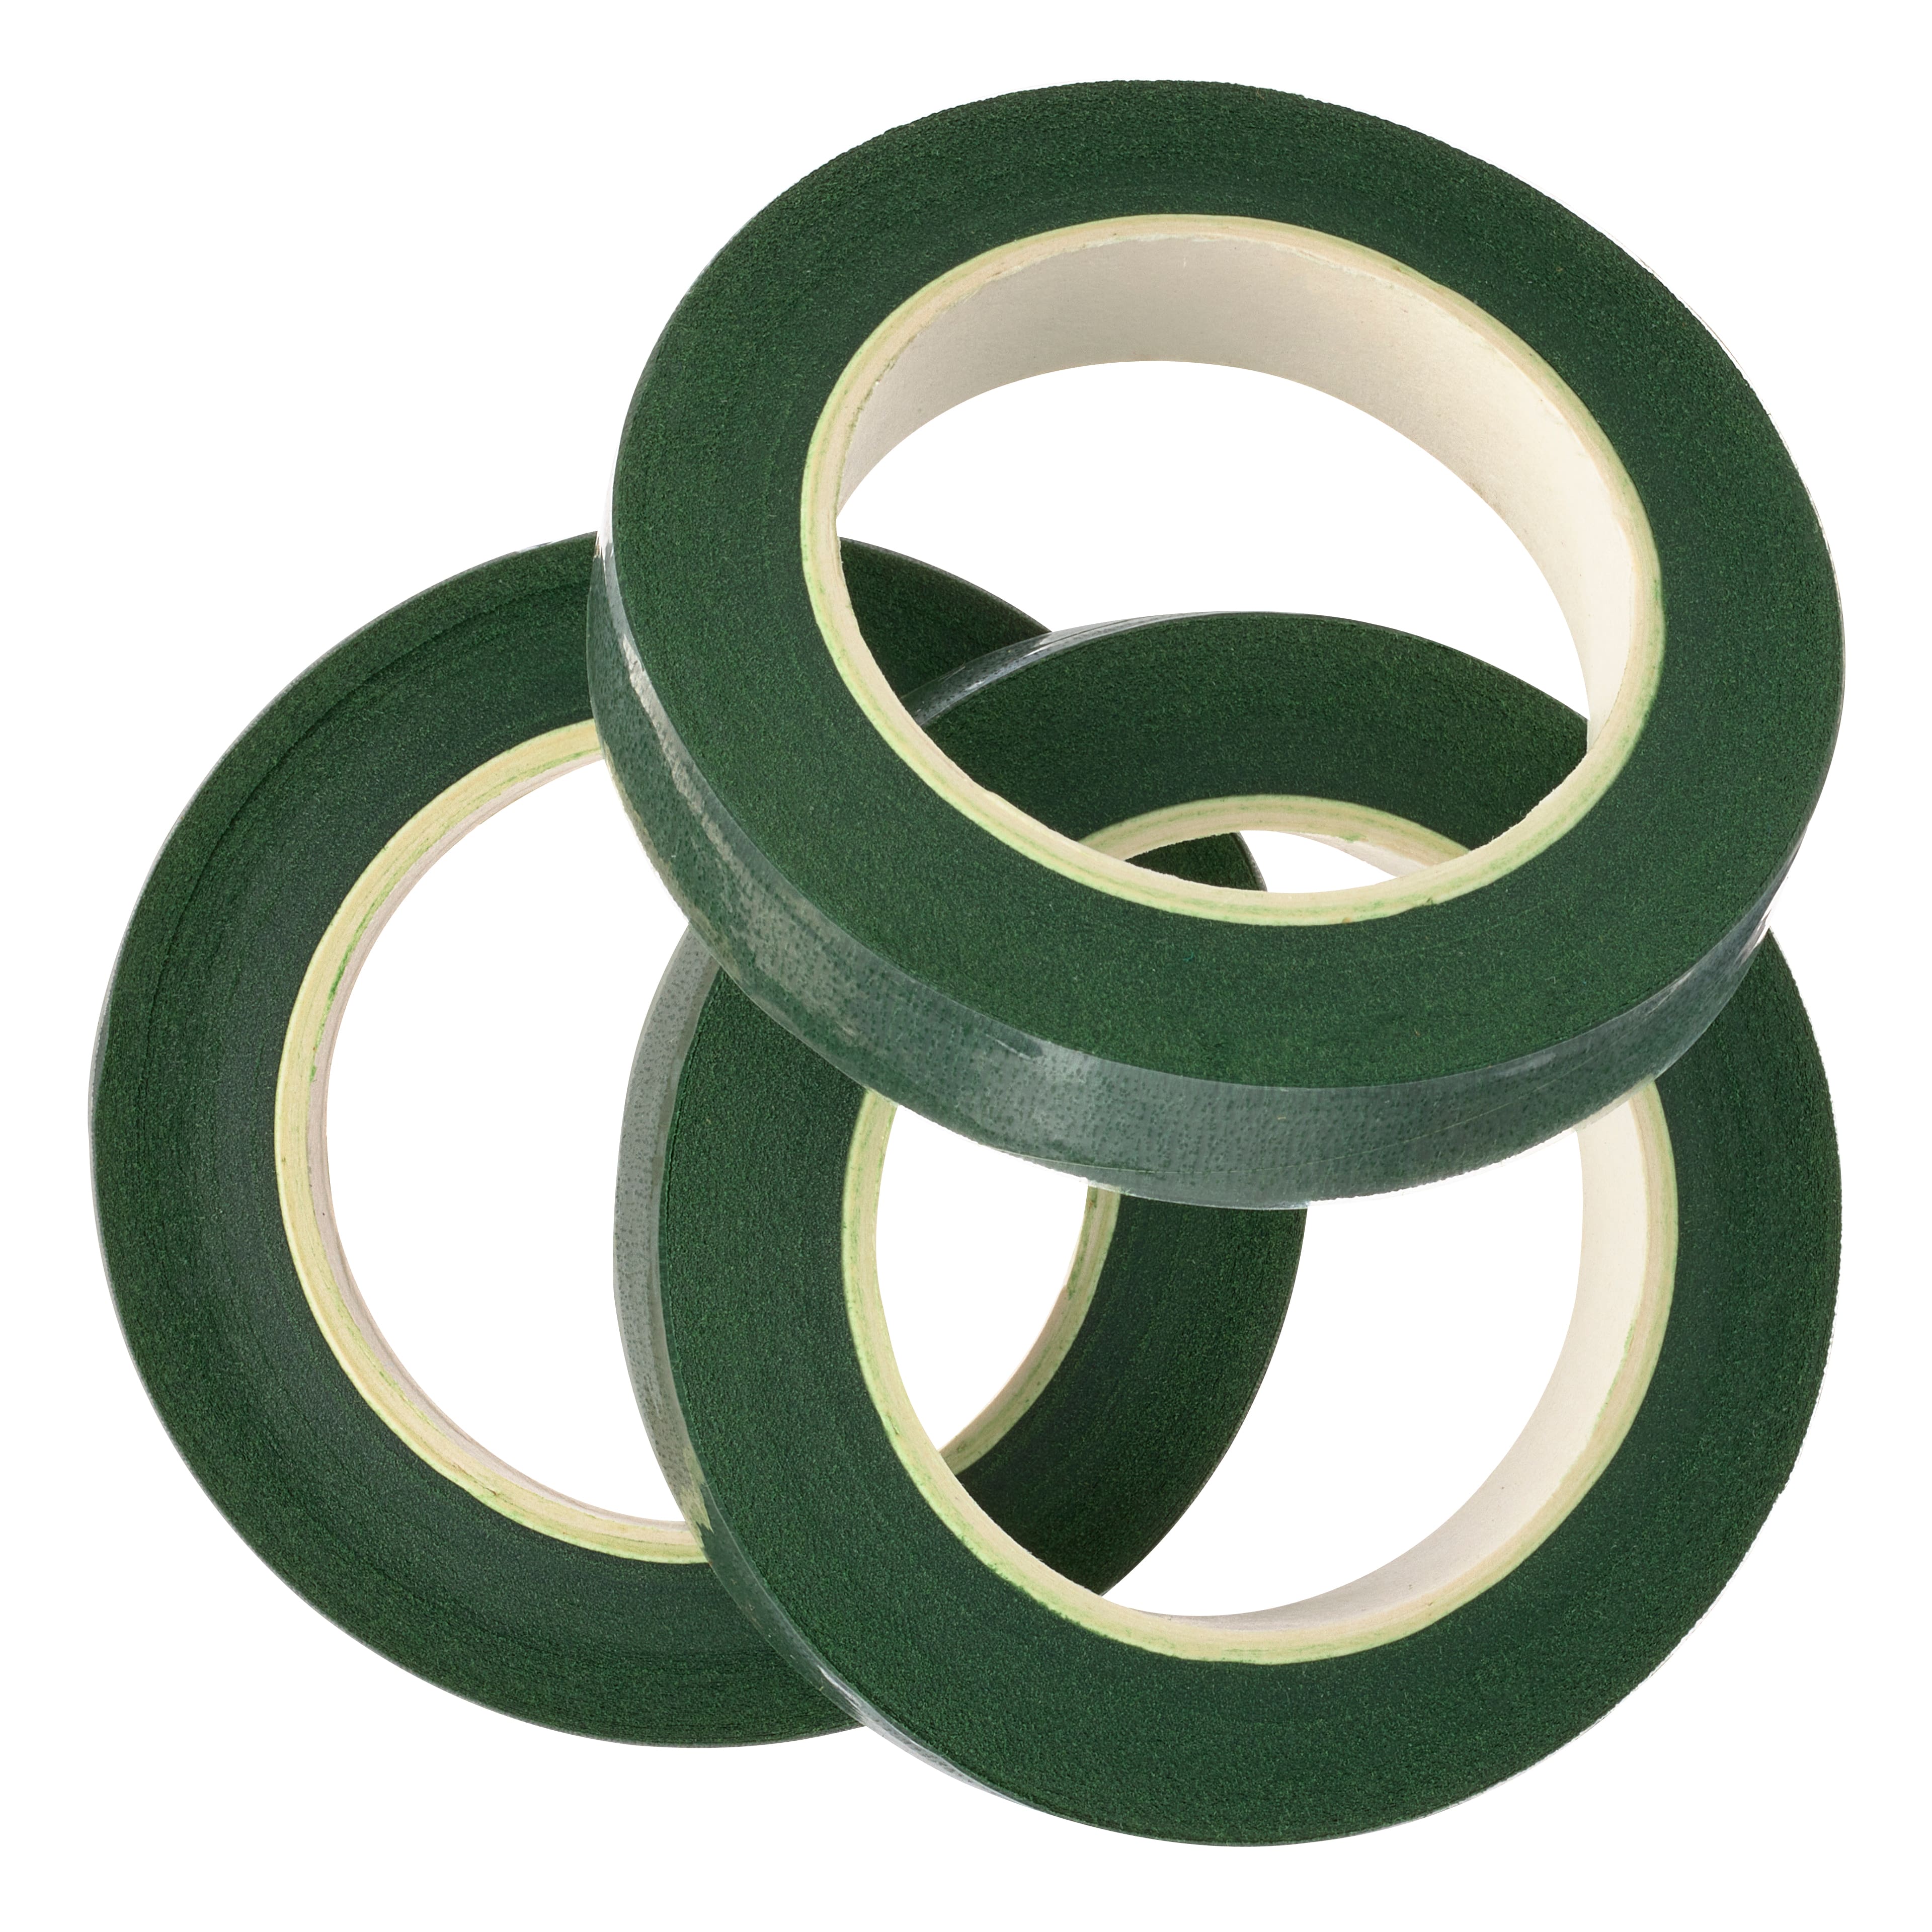 24 Pack: 26 Gauge Green Floral Wire with Cutter by Ashland